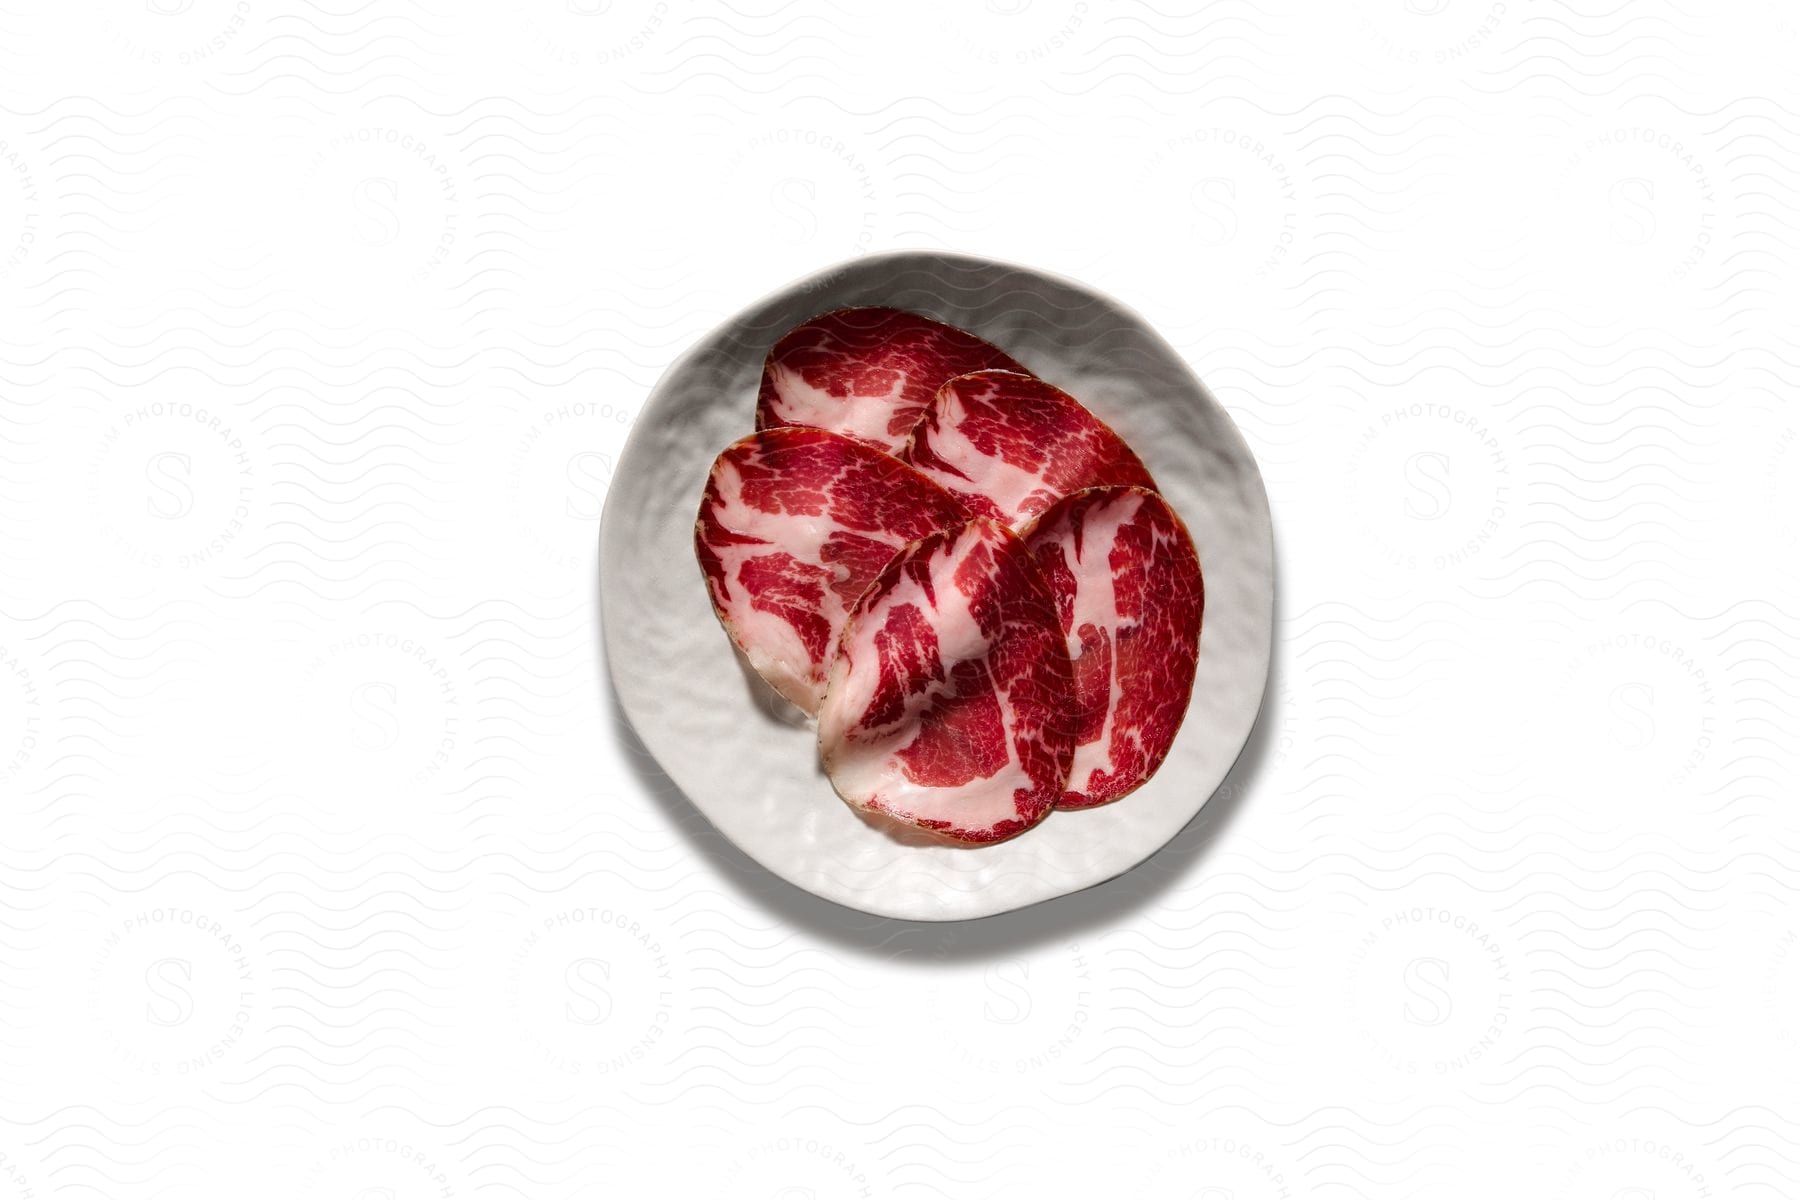 Raw steak is lying on a white plate